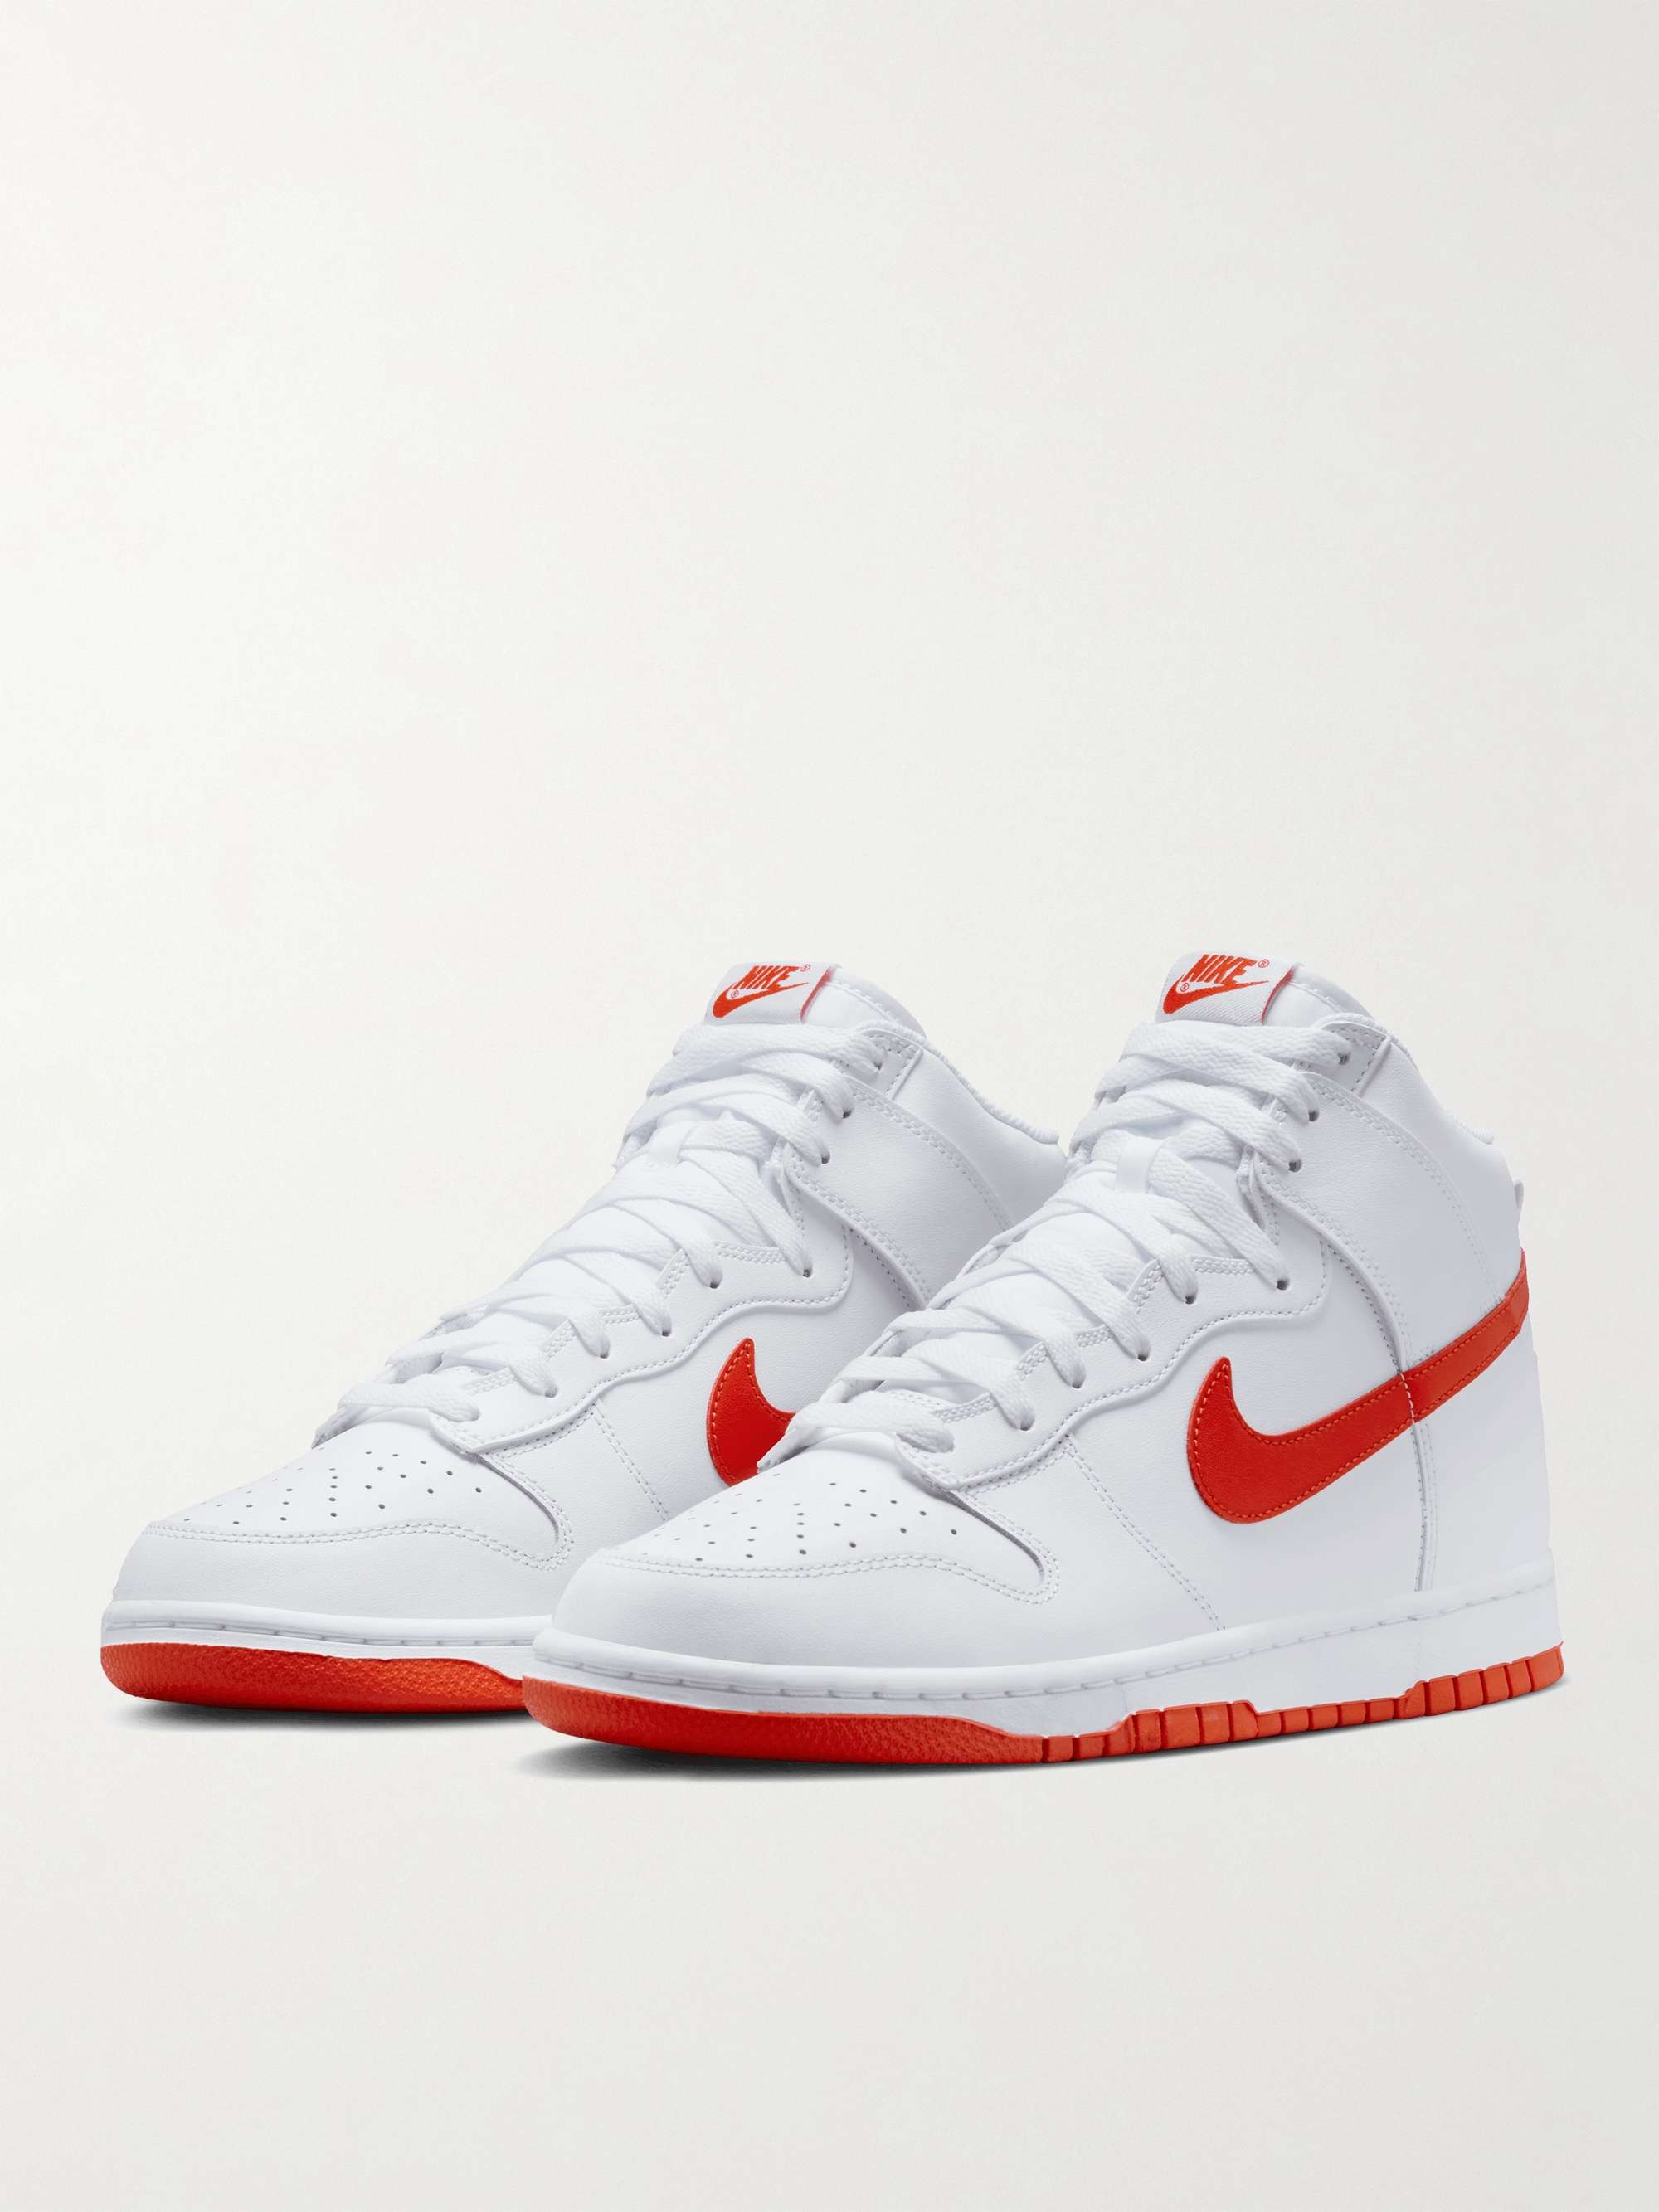 NIKE Dunk Hi Retro High-Top Leather Sneakers for Men | MR PORTER